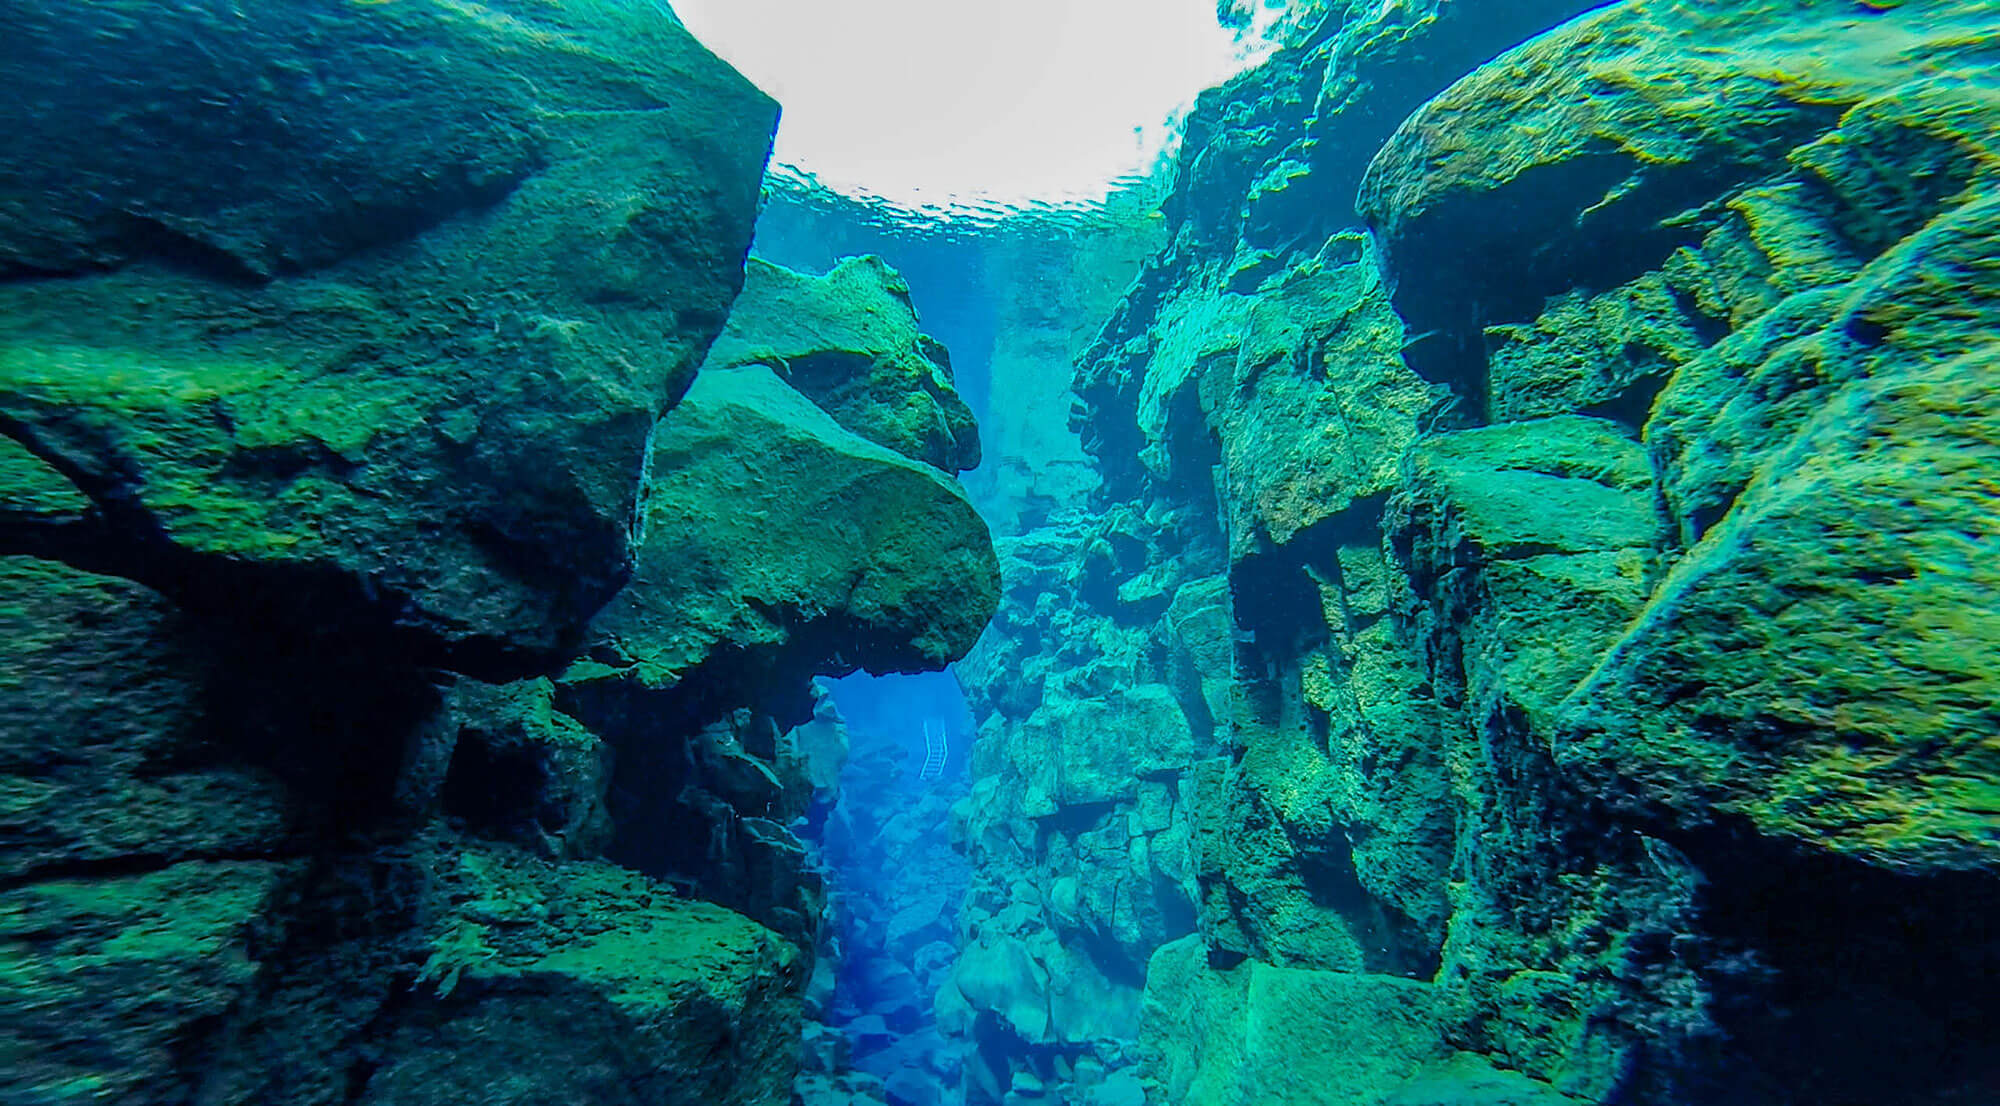 The Clear Water Of The Silfra Fissure With The Scuba And Snorkel Entry Ladder In The Distance, Iceland, Europe